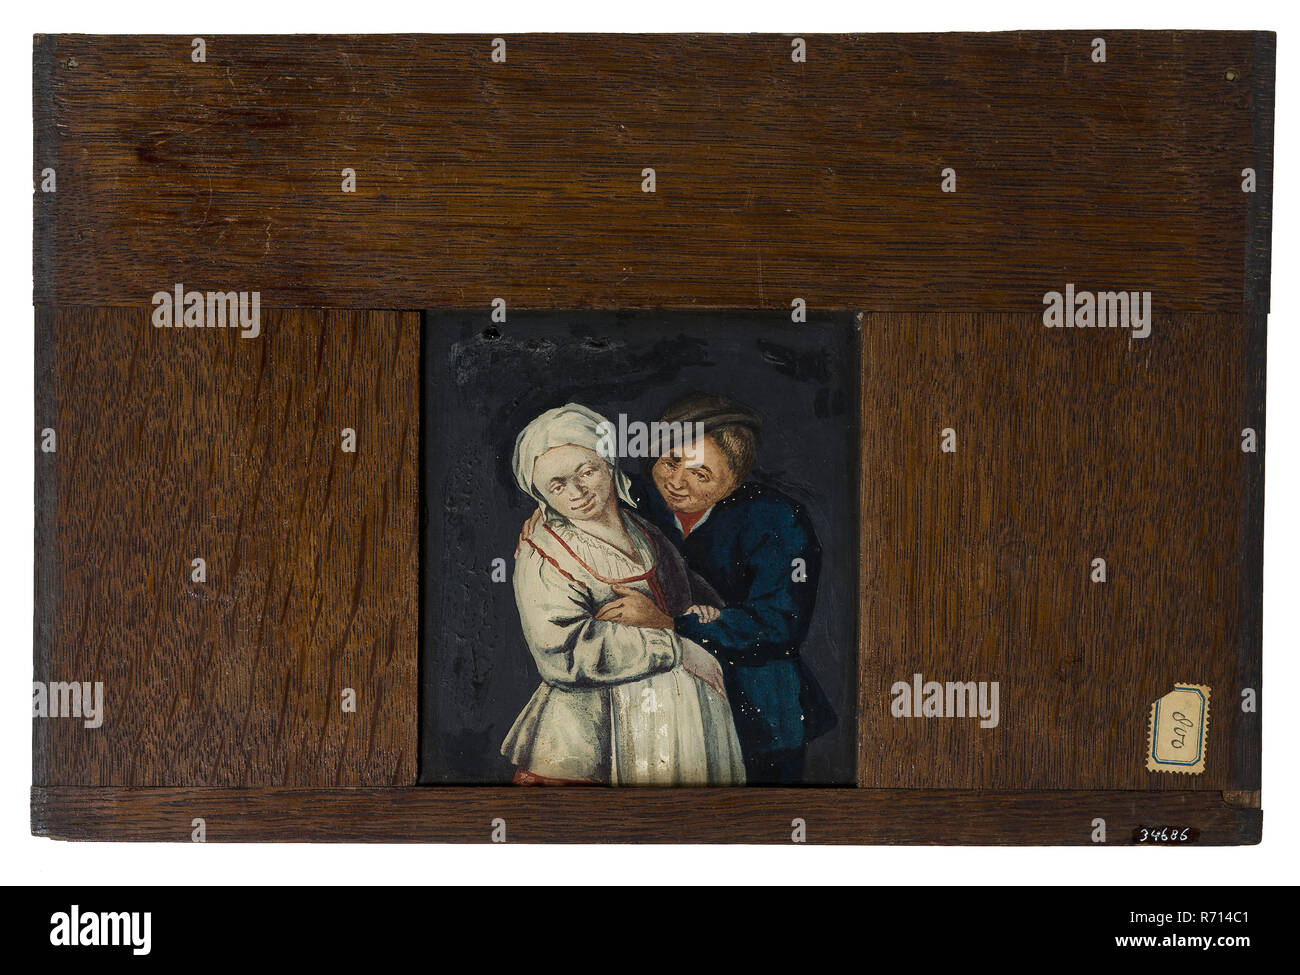 Hand-painted glass plate in wooden frame for illumination cabinet, image of approach man at woman, slideshelf slideshoot pictures glass paint wood oak leg, dimensions) handpainted Hand-painted glass for illumination cabinet in wide oak frame The frame is rejuvenated on the sides and shows wear and discolouration: the plates were pushed into an illumination cabinet from above. At the back left and right above two small legs fastening points for the illumination cabinet. Image of pregnant woman who is approached by man in black optics folk life Stock Photo